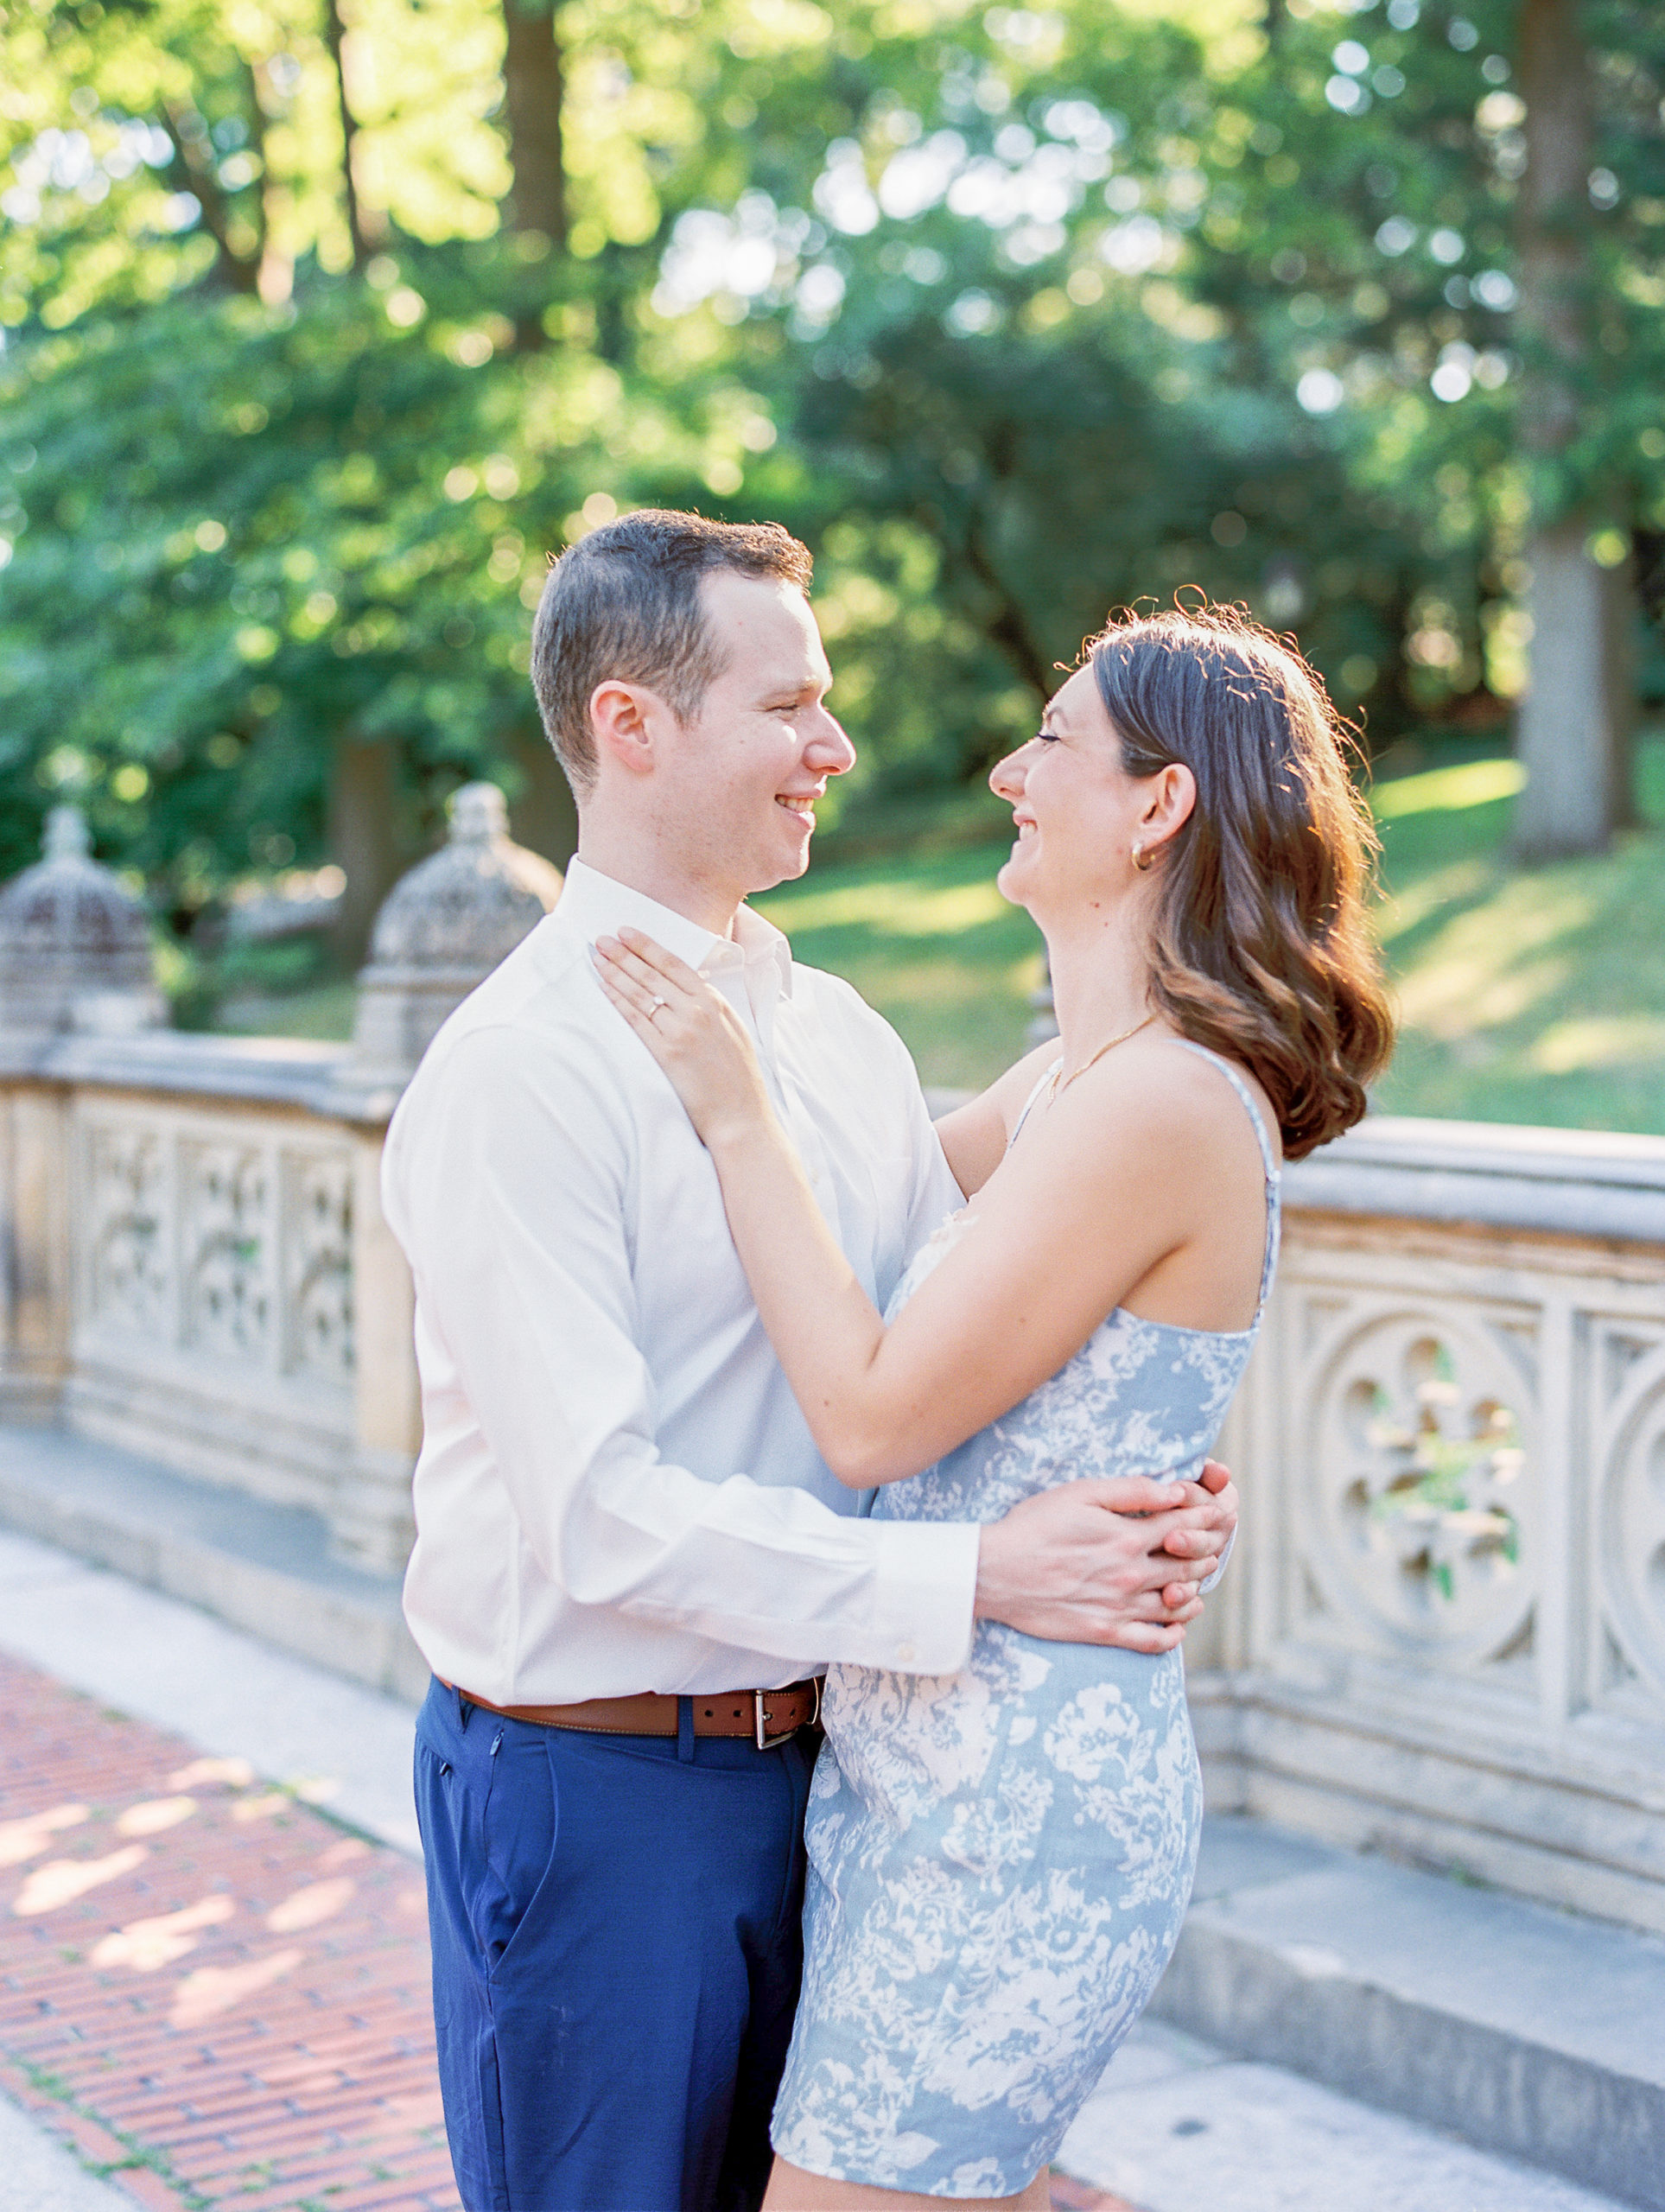 Couple embrace and smile at each other in park for Central Park Engagement Photos